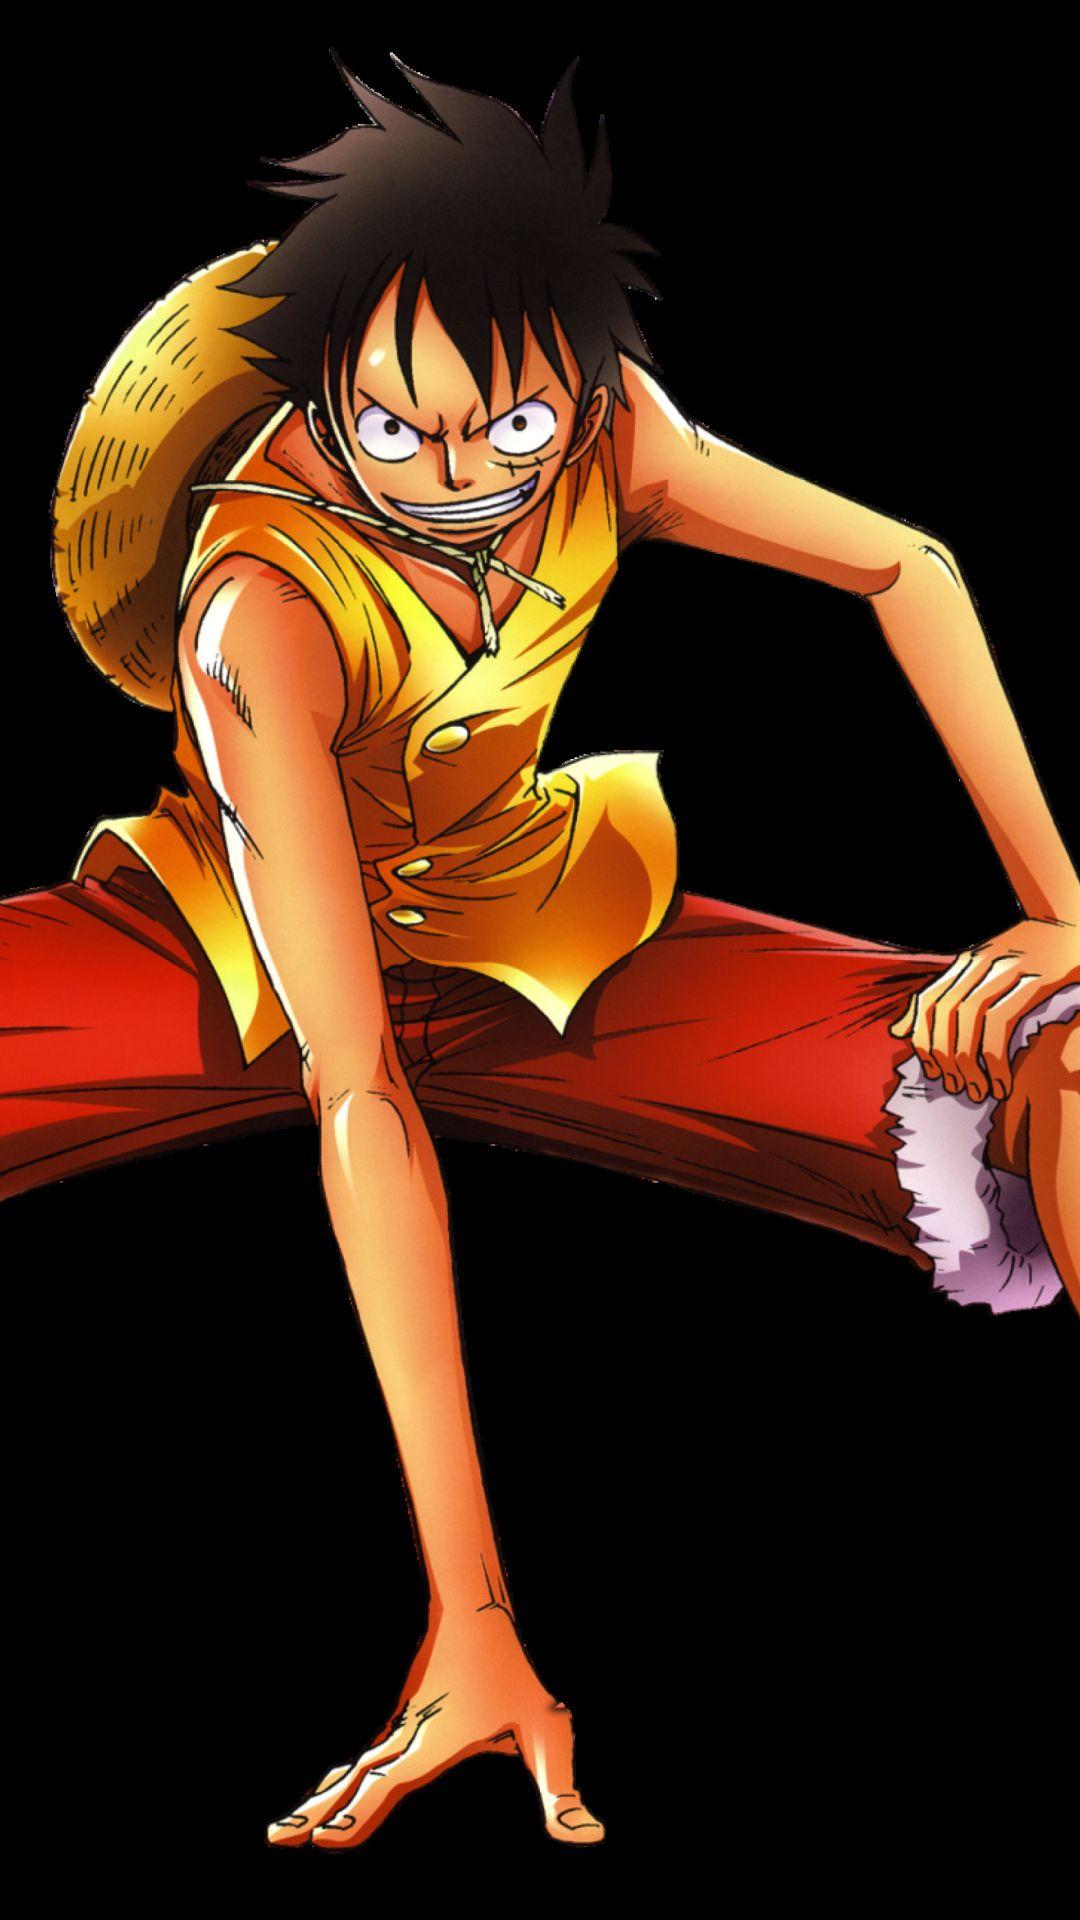 Wallpapers Luffy One Piece - Wallpaper Cave